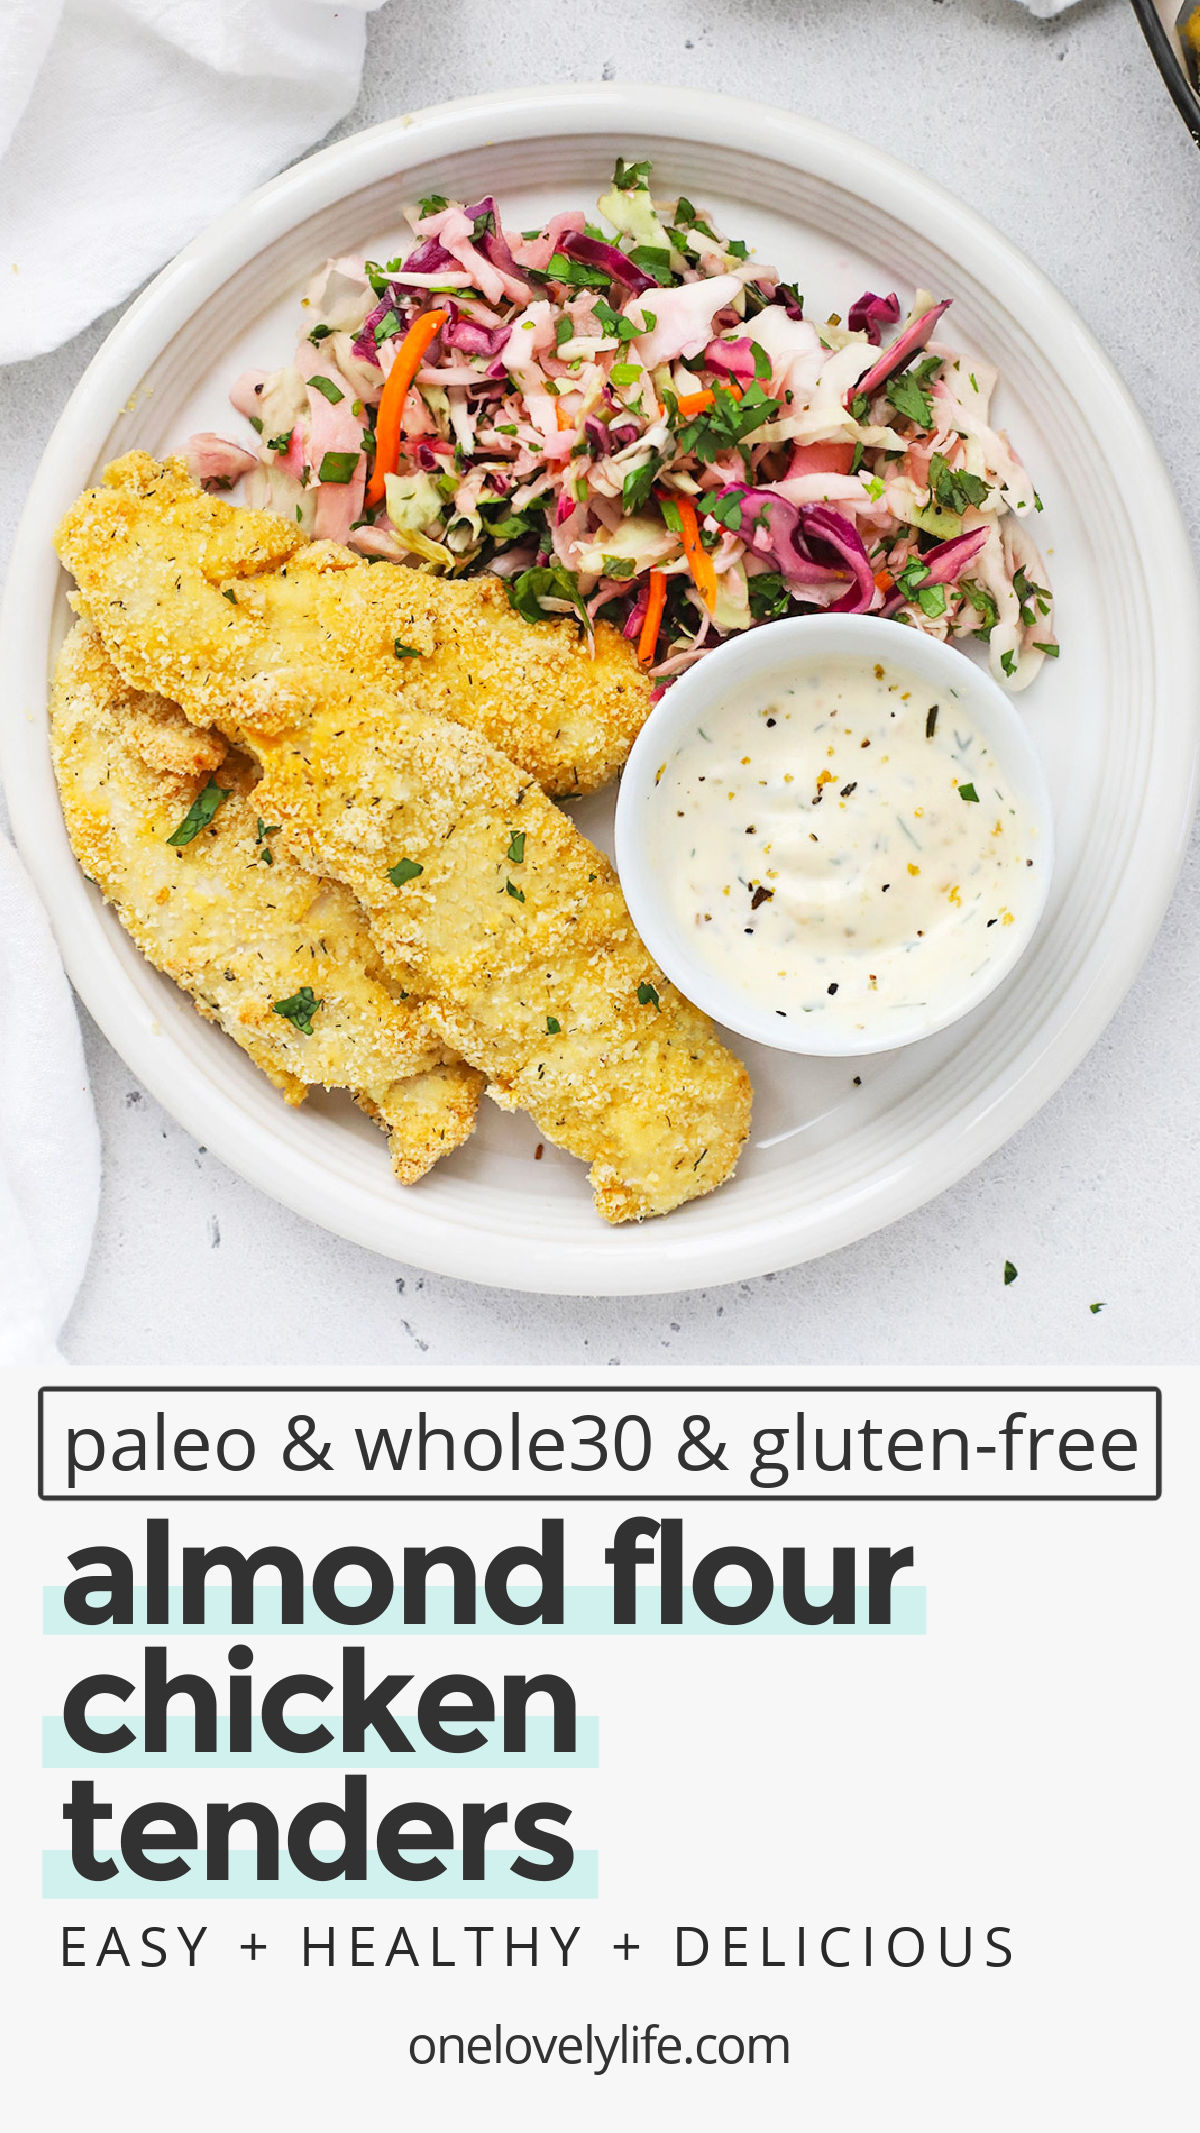 Almond Flour Chicken Tenders - These healthy chicken tenders are breaded with seasoned almond flour and cooked to perfection. Enjoy them on their own, or try them with one of our dipping sauces below! (Paleo, Whole30, Gluten-Free) // Paleo Chicken Tenders // Whole30 Chicken Tenders // Crispy Chicken Tenders // Gluten Free Chicken Tenders // Paleo dinner // Whole30 dinner #easydinner #whole30 #paleo #glutenfree #almondflour #lowcarb #chickentenders